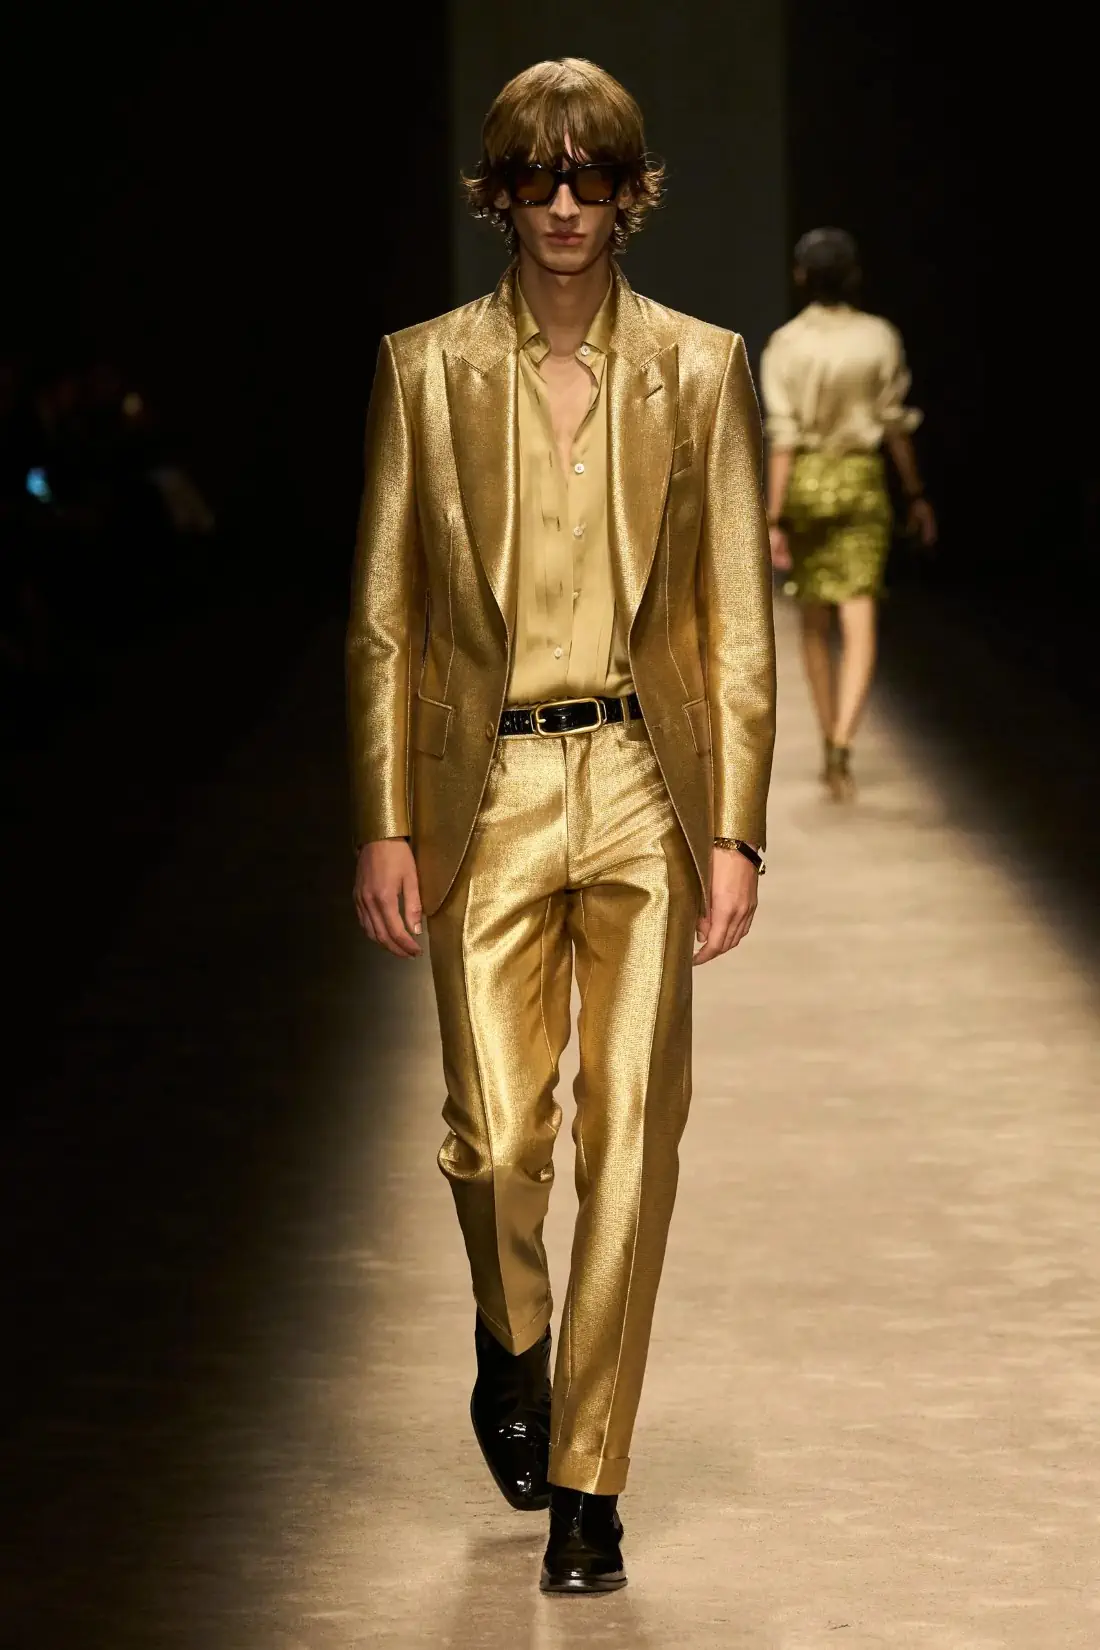 The New Path of Tom Ford Fashion